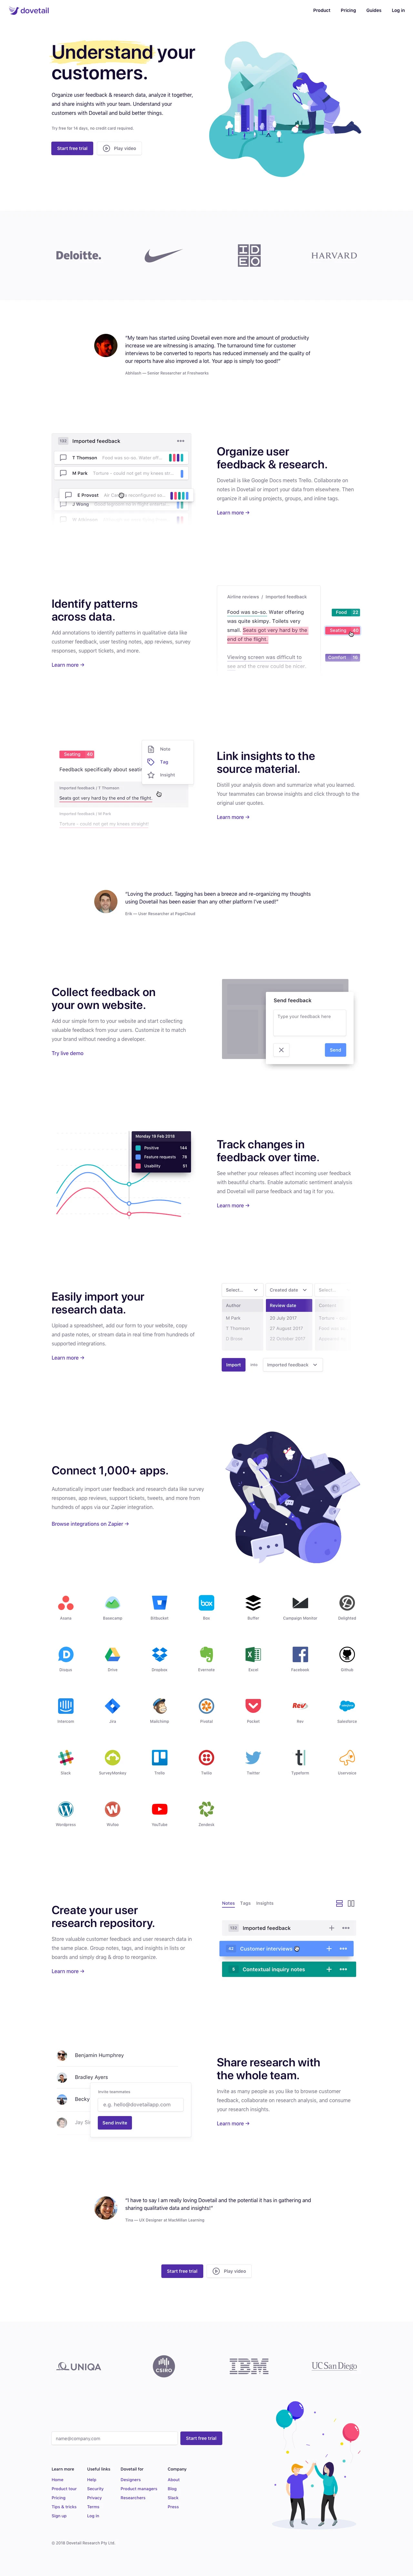 Dovetail Landing Page Example: Organize user feedback & research data, analyze it together, and share insights with your team. Understand your customers with Dovetail and build better things.